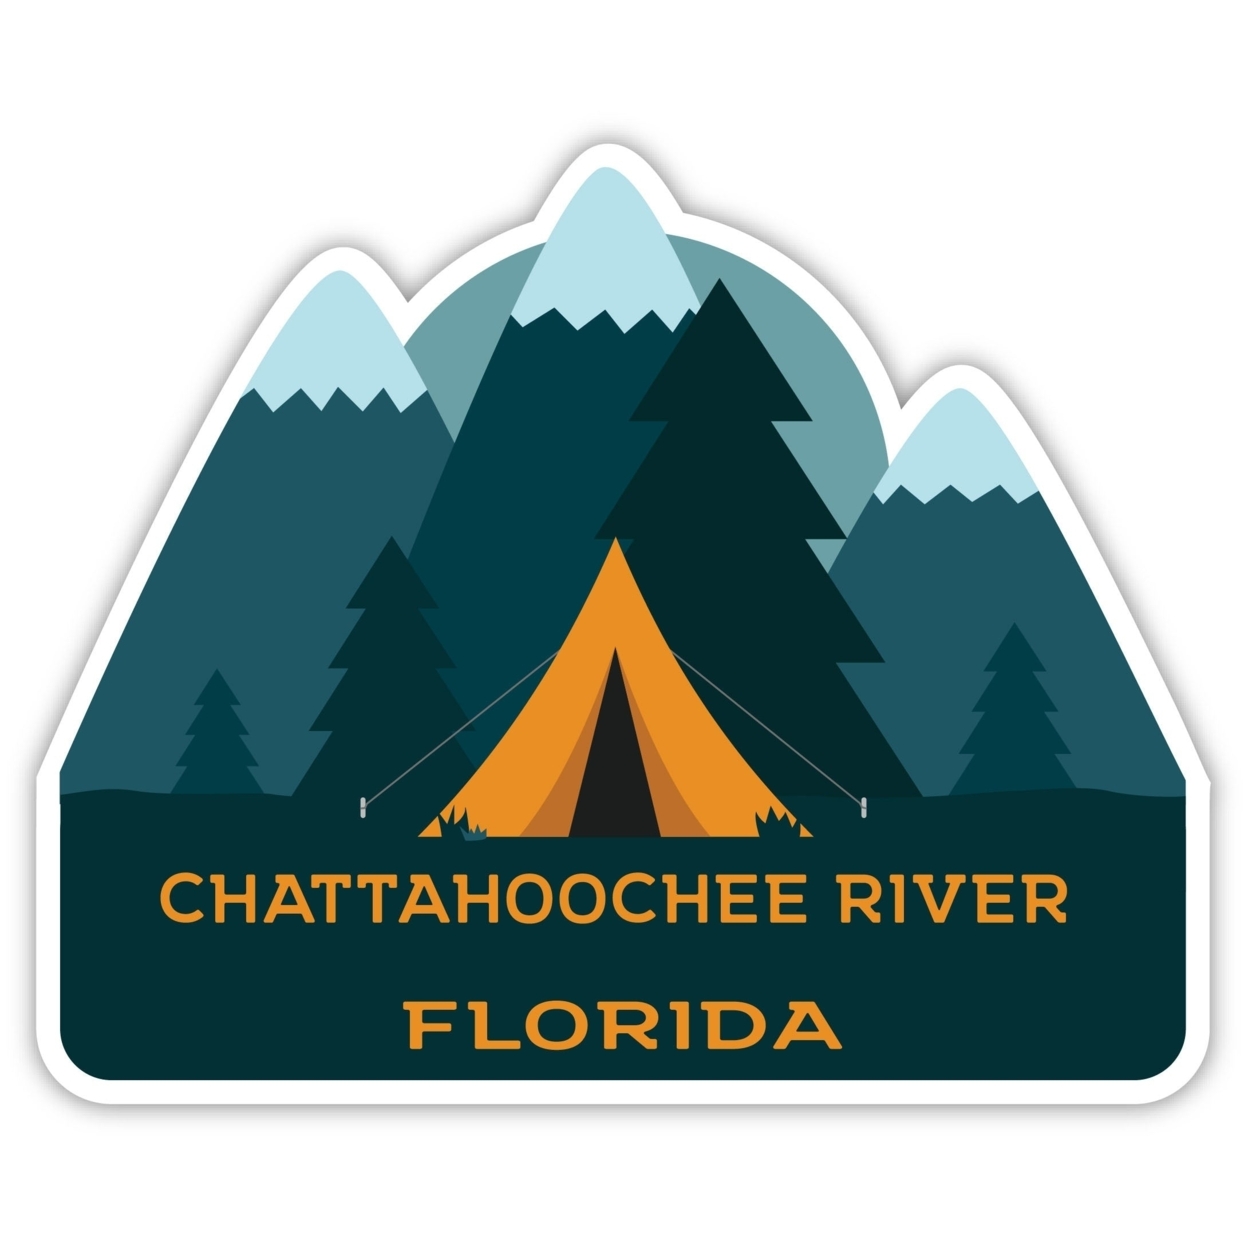 Chattahoochee River Florida Souvenir Decorative Stickers (Choose Theme And Size) - 4-Pack, 4-Inch, Tent